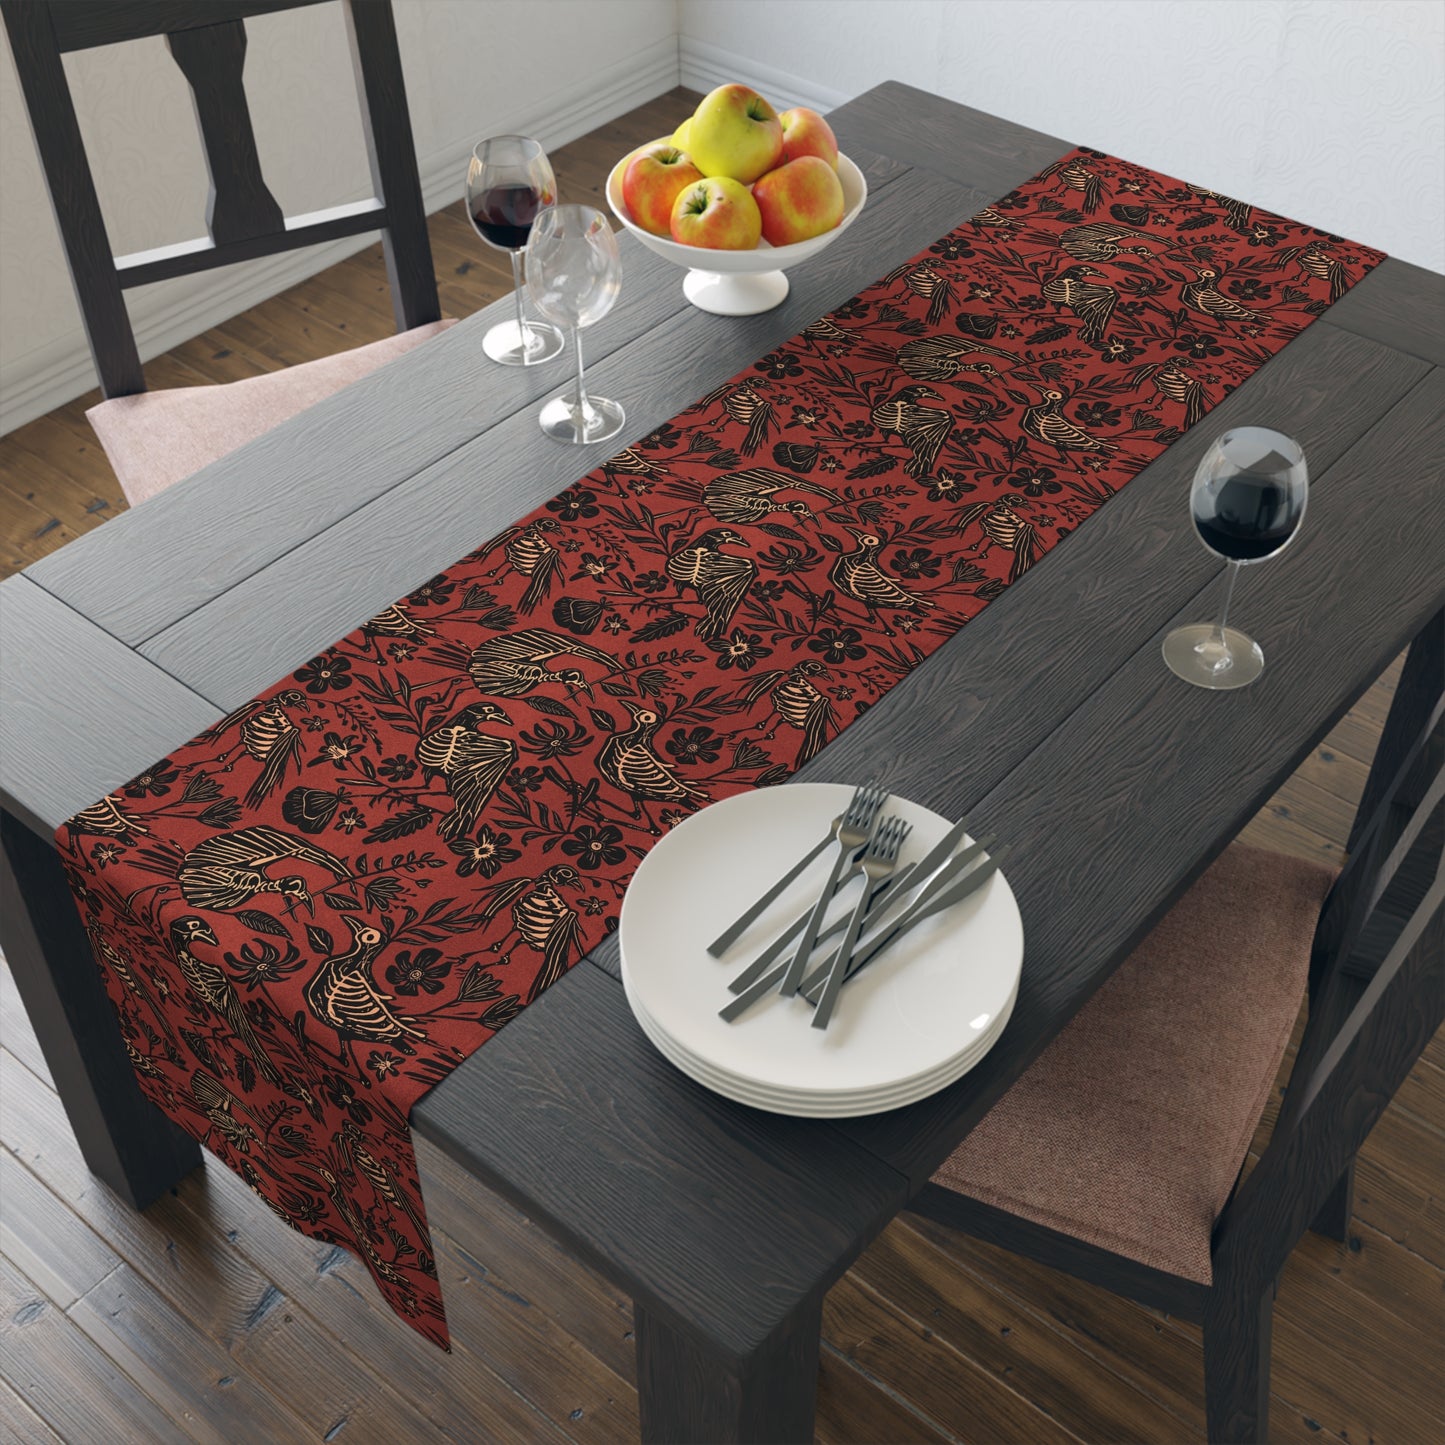 macabre autumn folk art floral bird skeleton table runner in rust red orange on a black table with wine glasses and apples